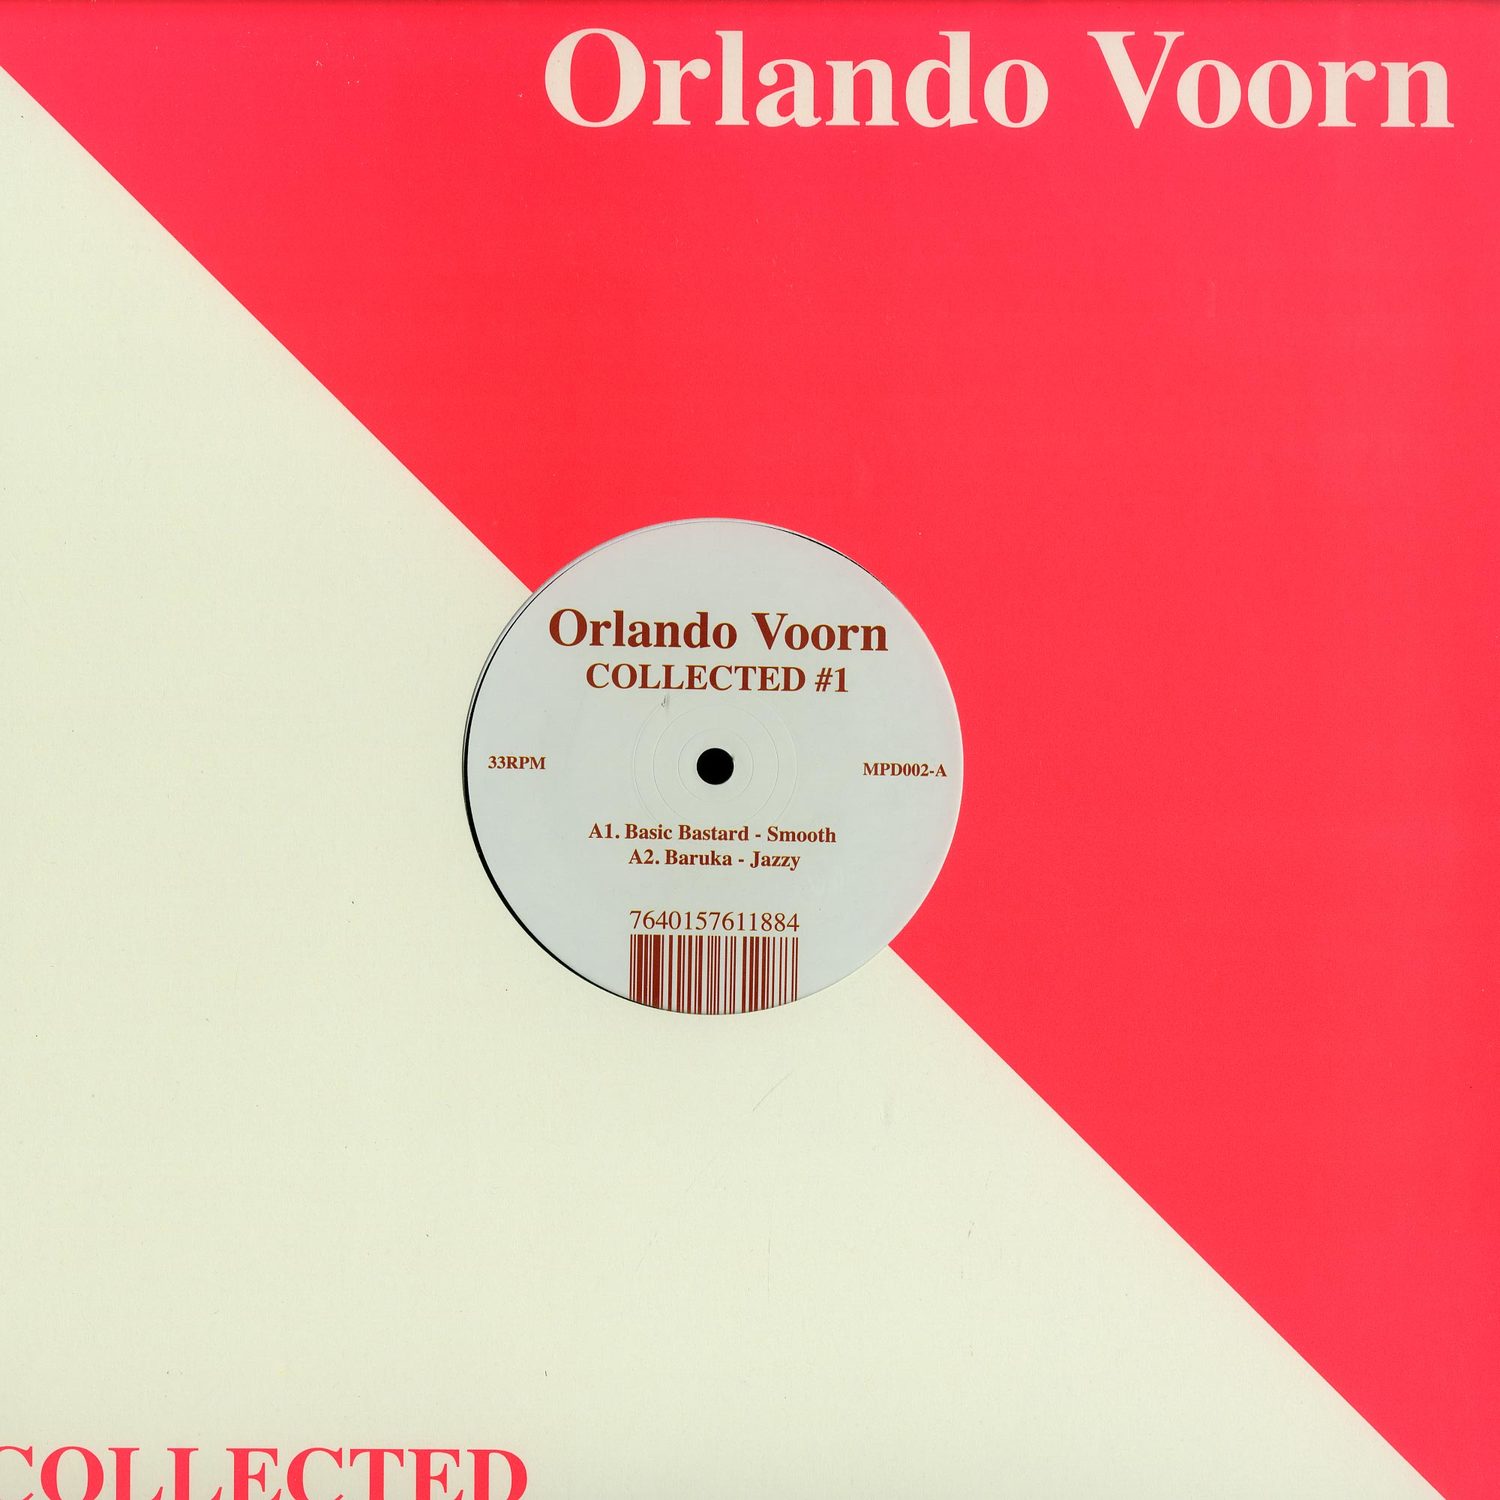 Orlando Voorn - COLLECTED EP 1